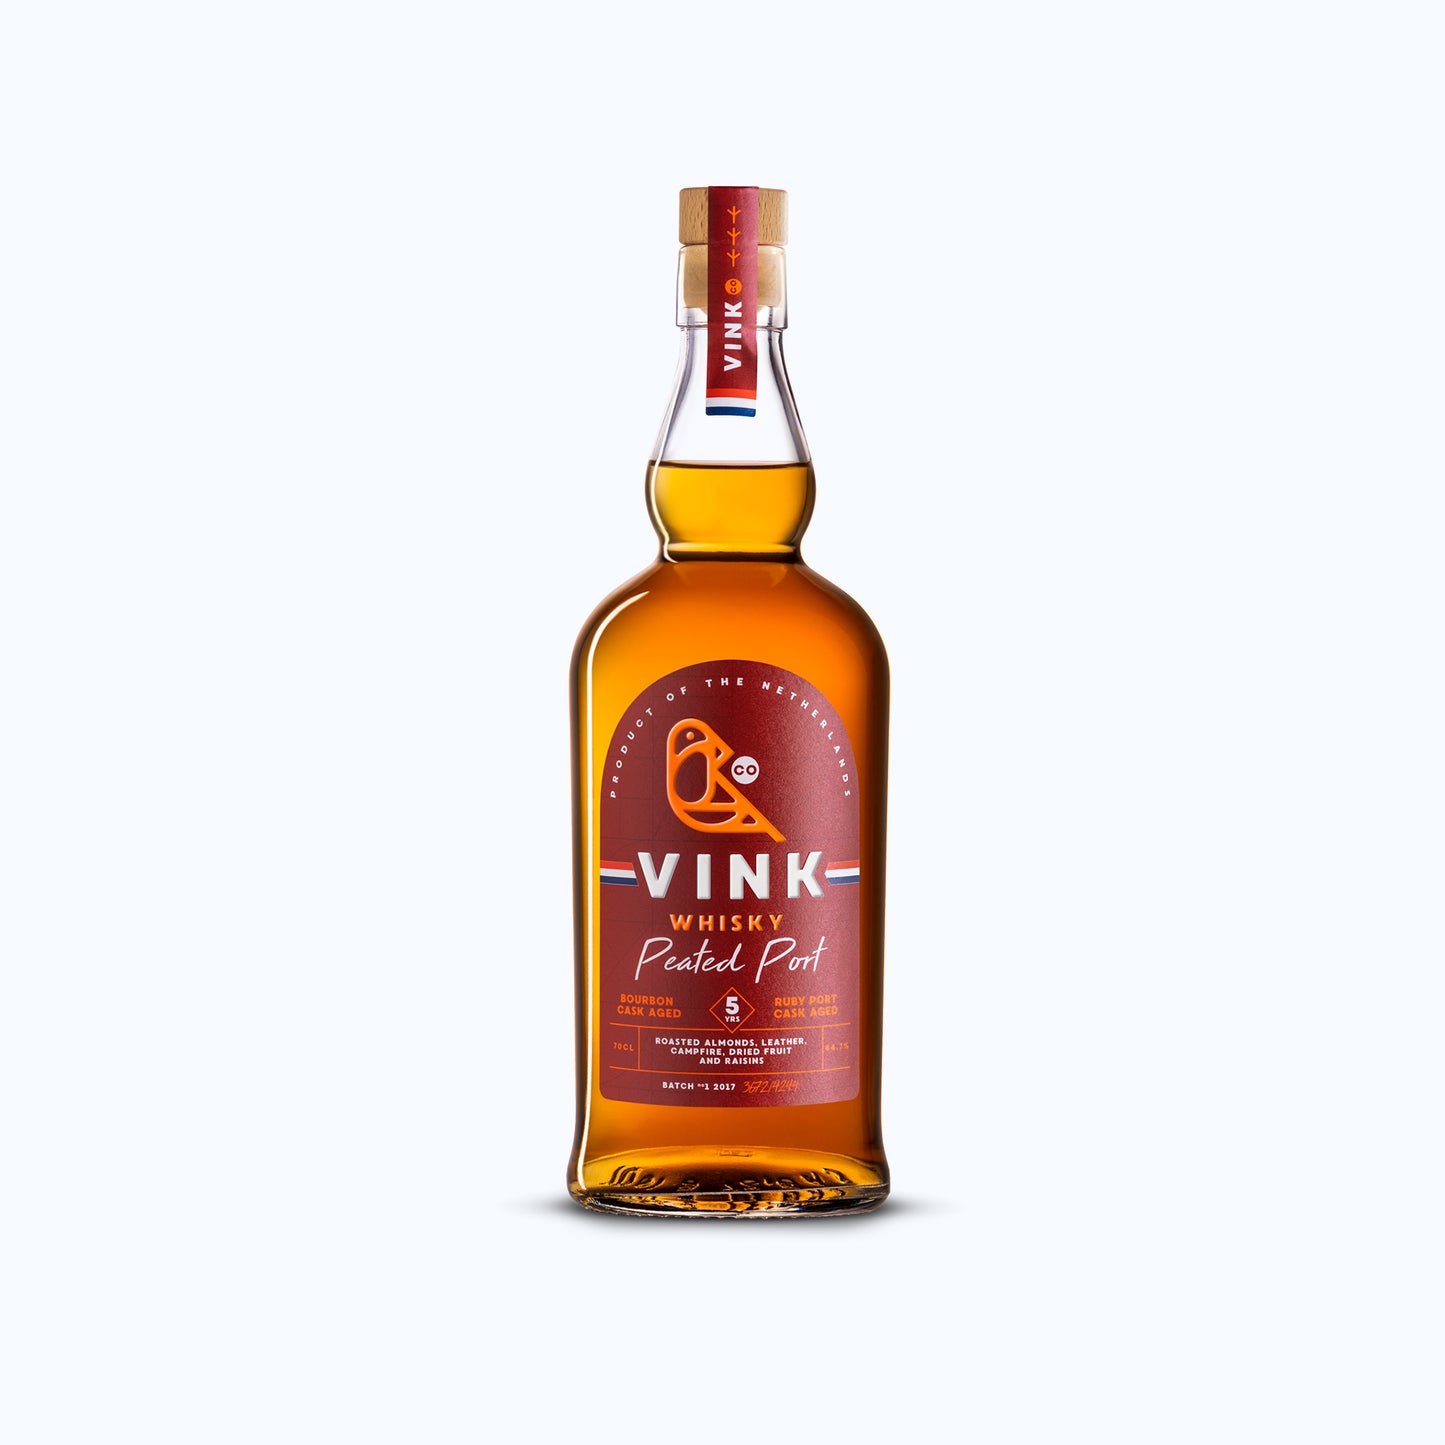 Vink Whisky Peated Port 5 years